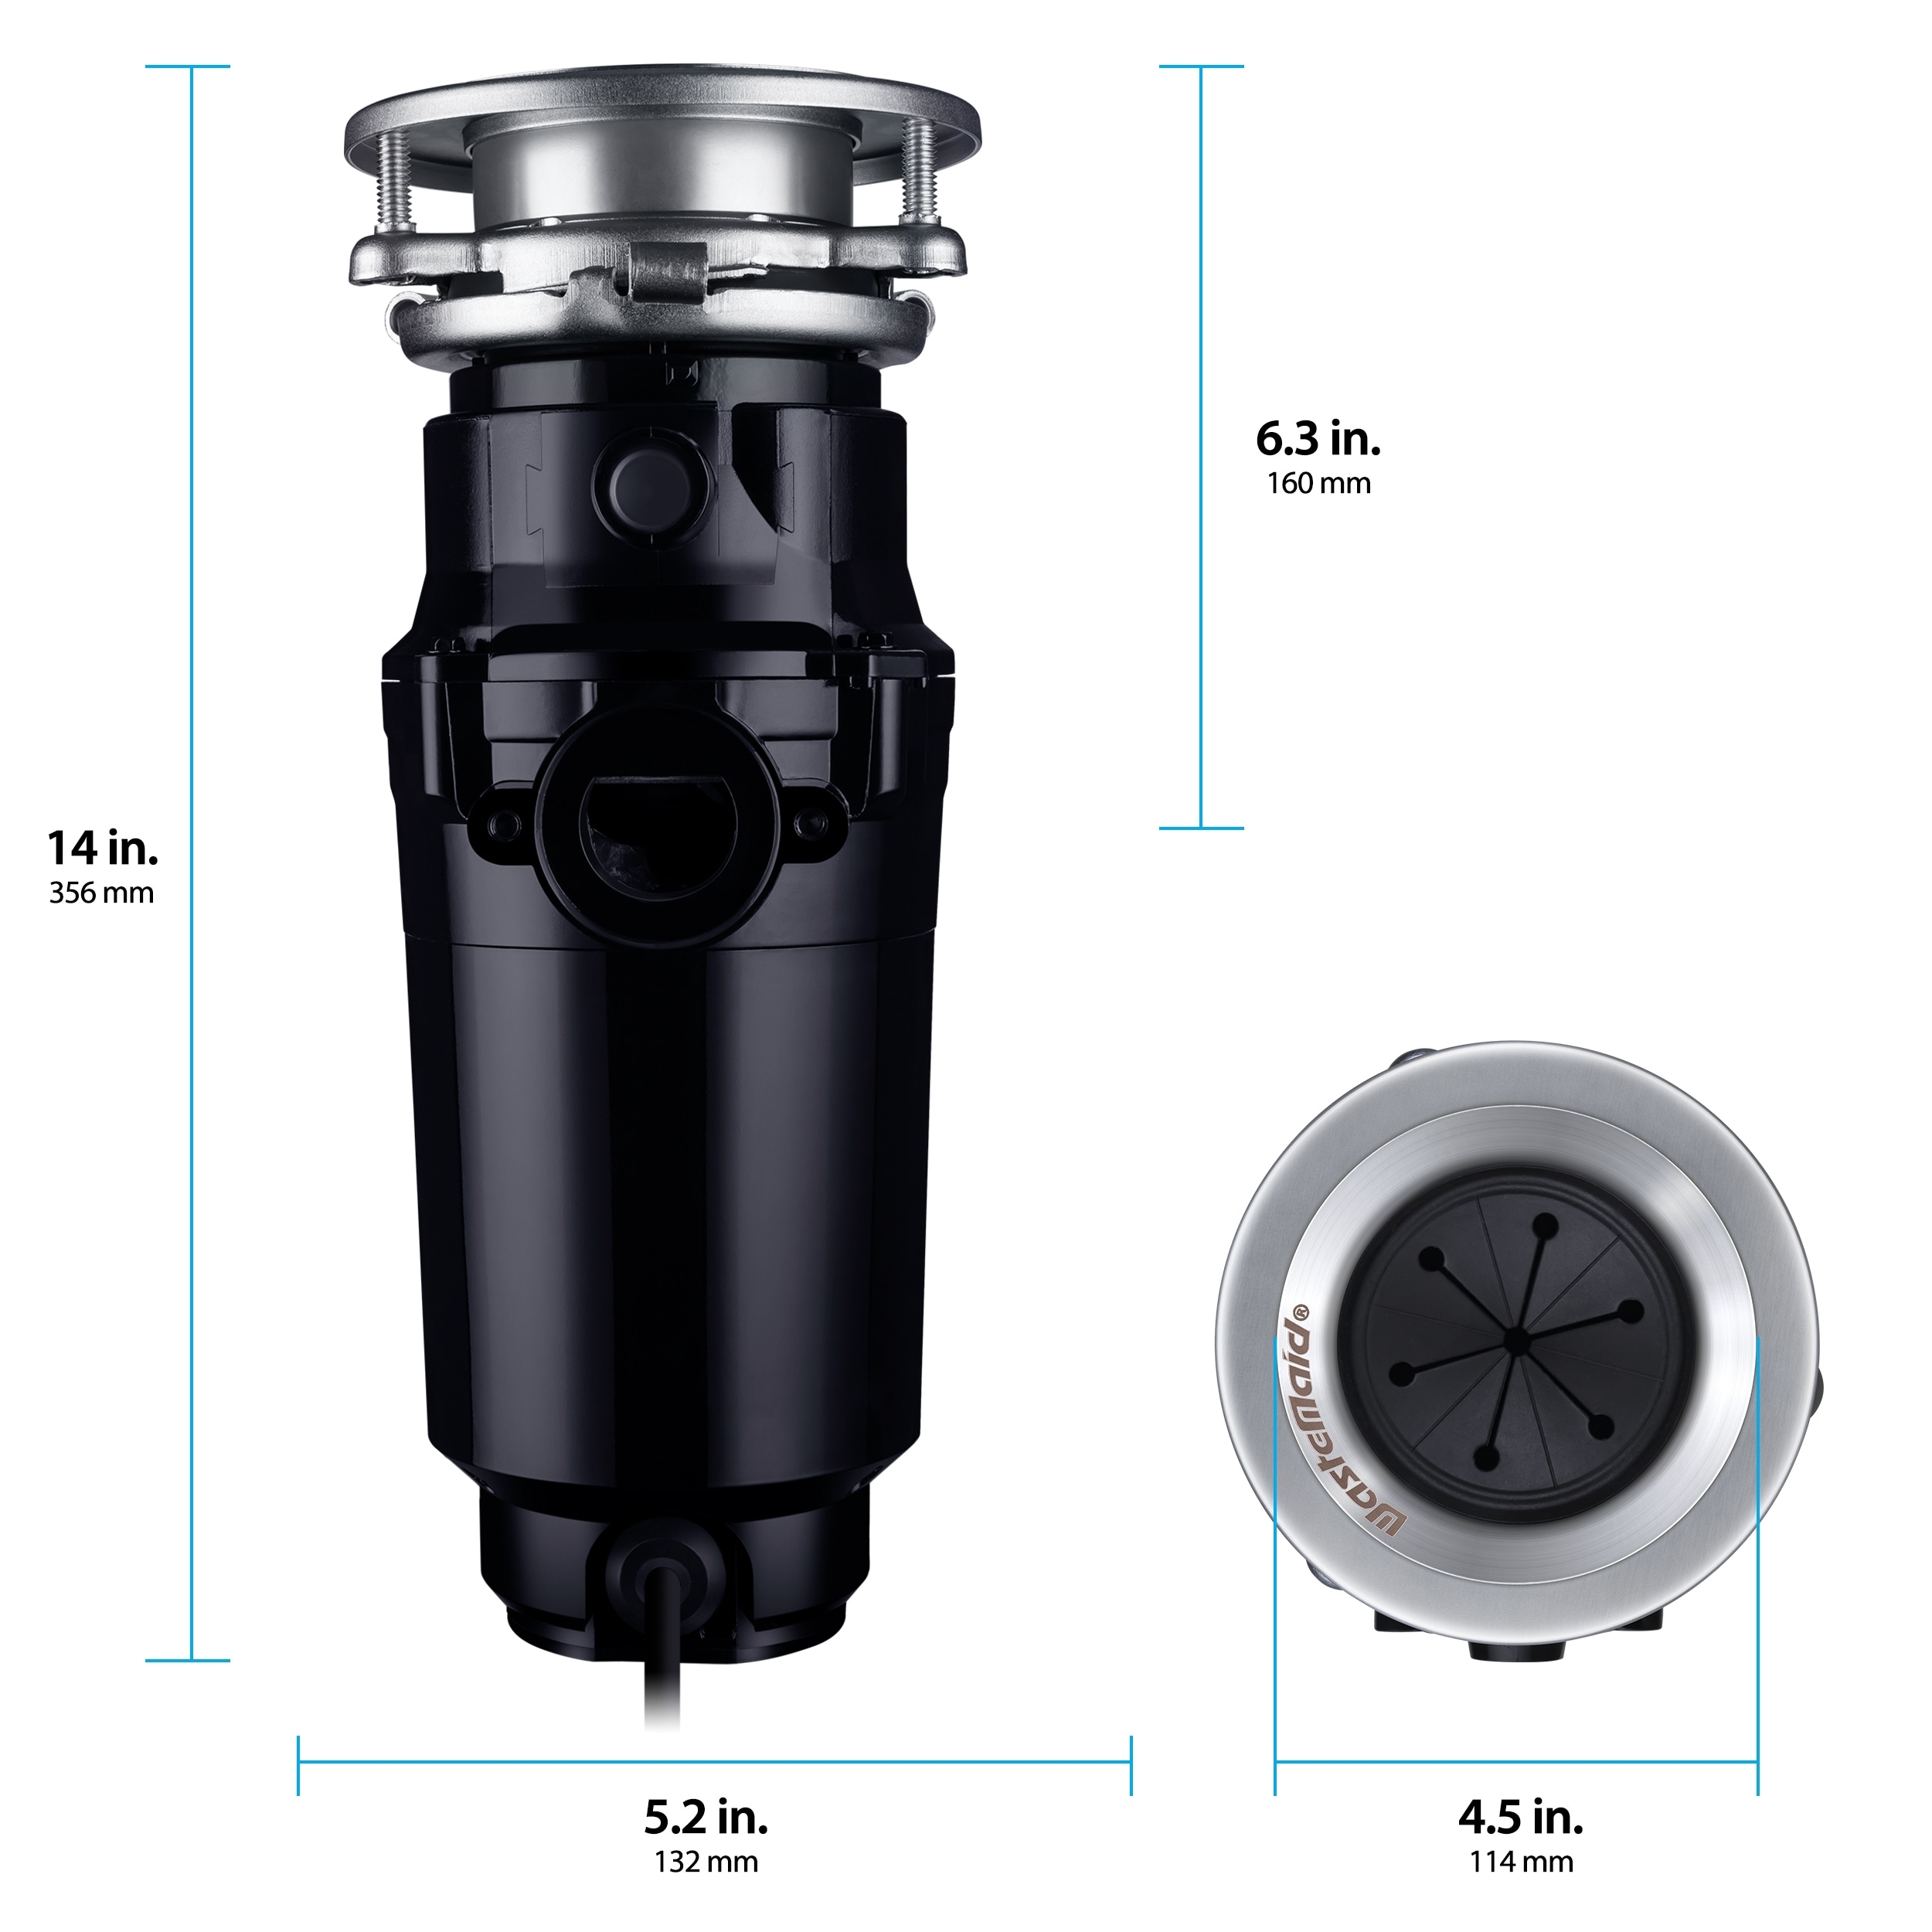 Titan 10-US-TN-T-960-3B Garbage Disposal, HP Deluxe, Black with Stainless Steel Sink Flange and Silver Guard - 2